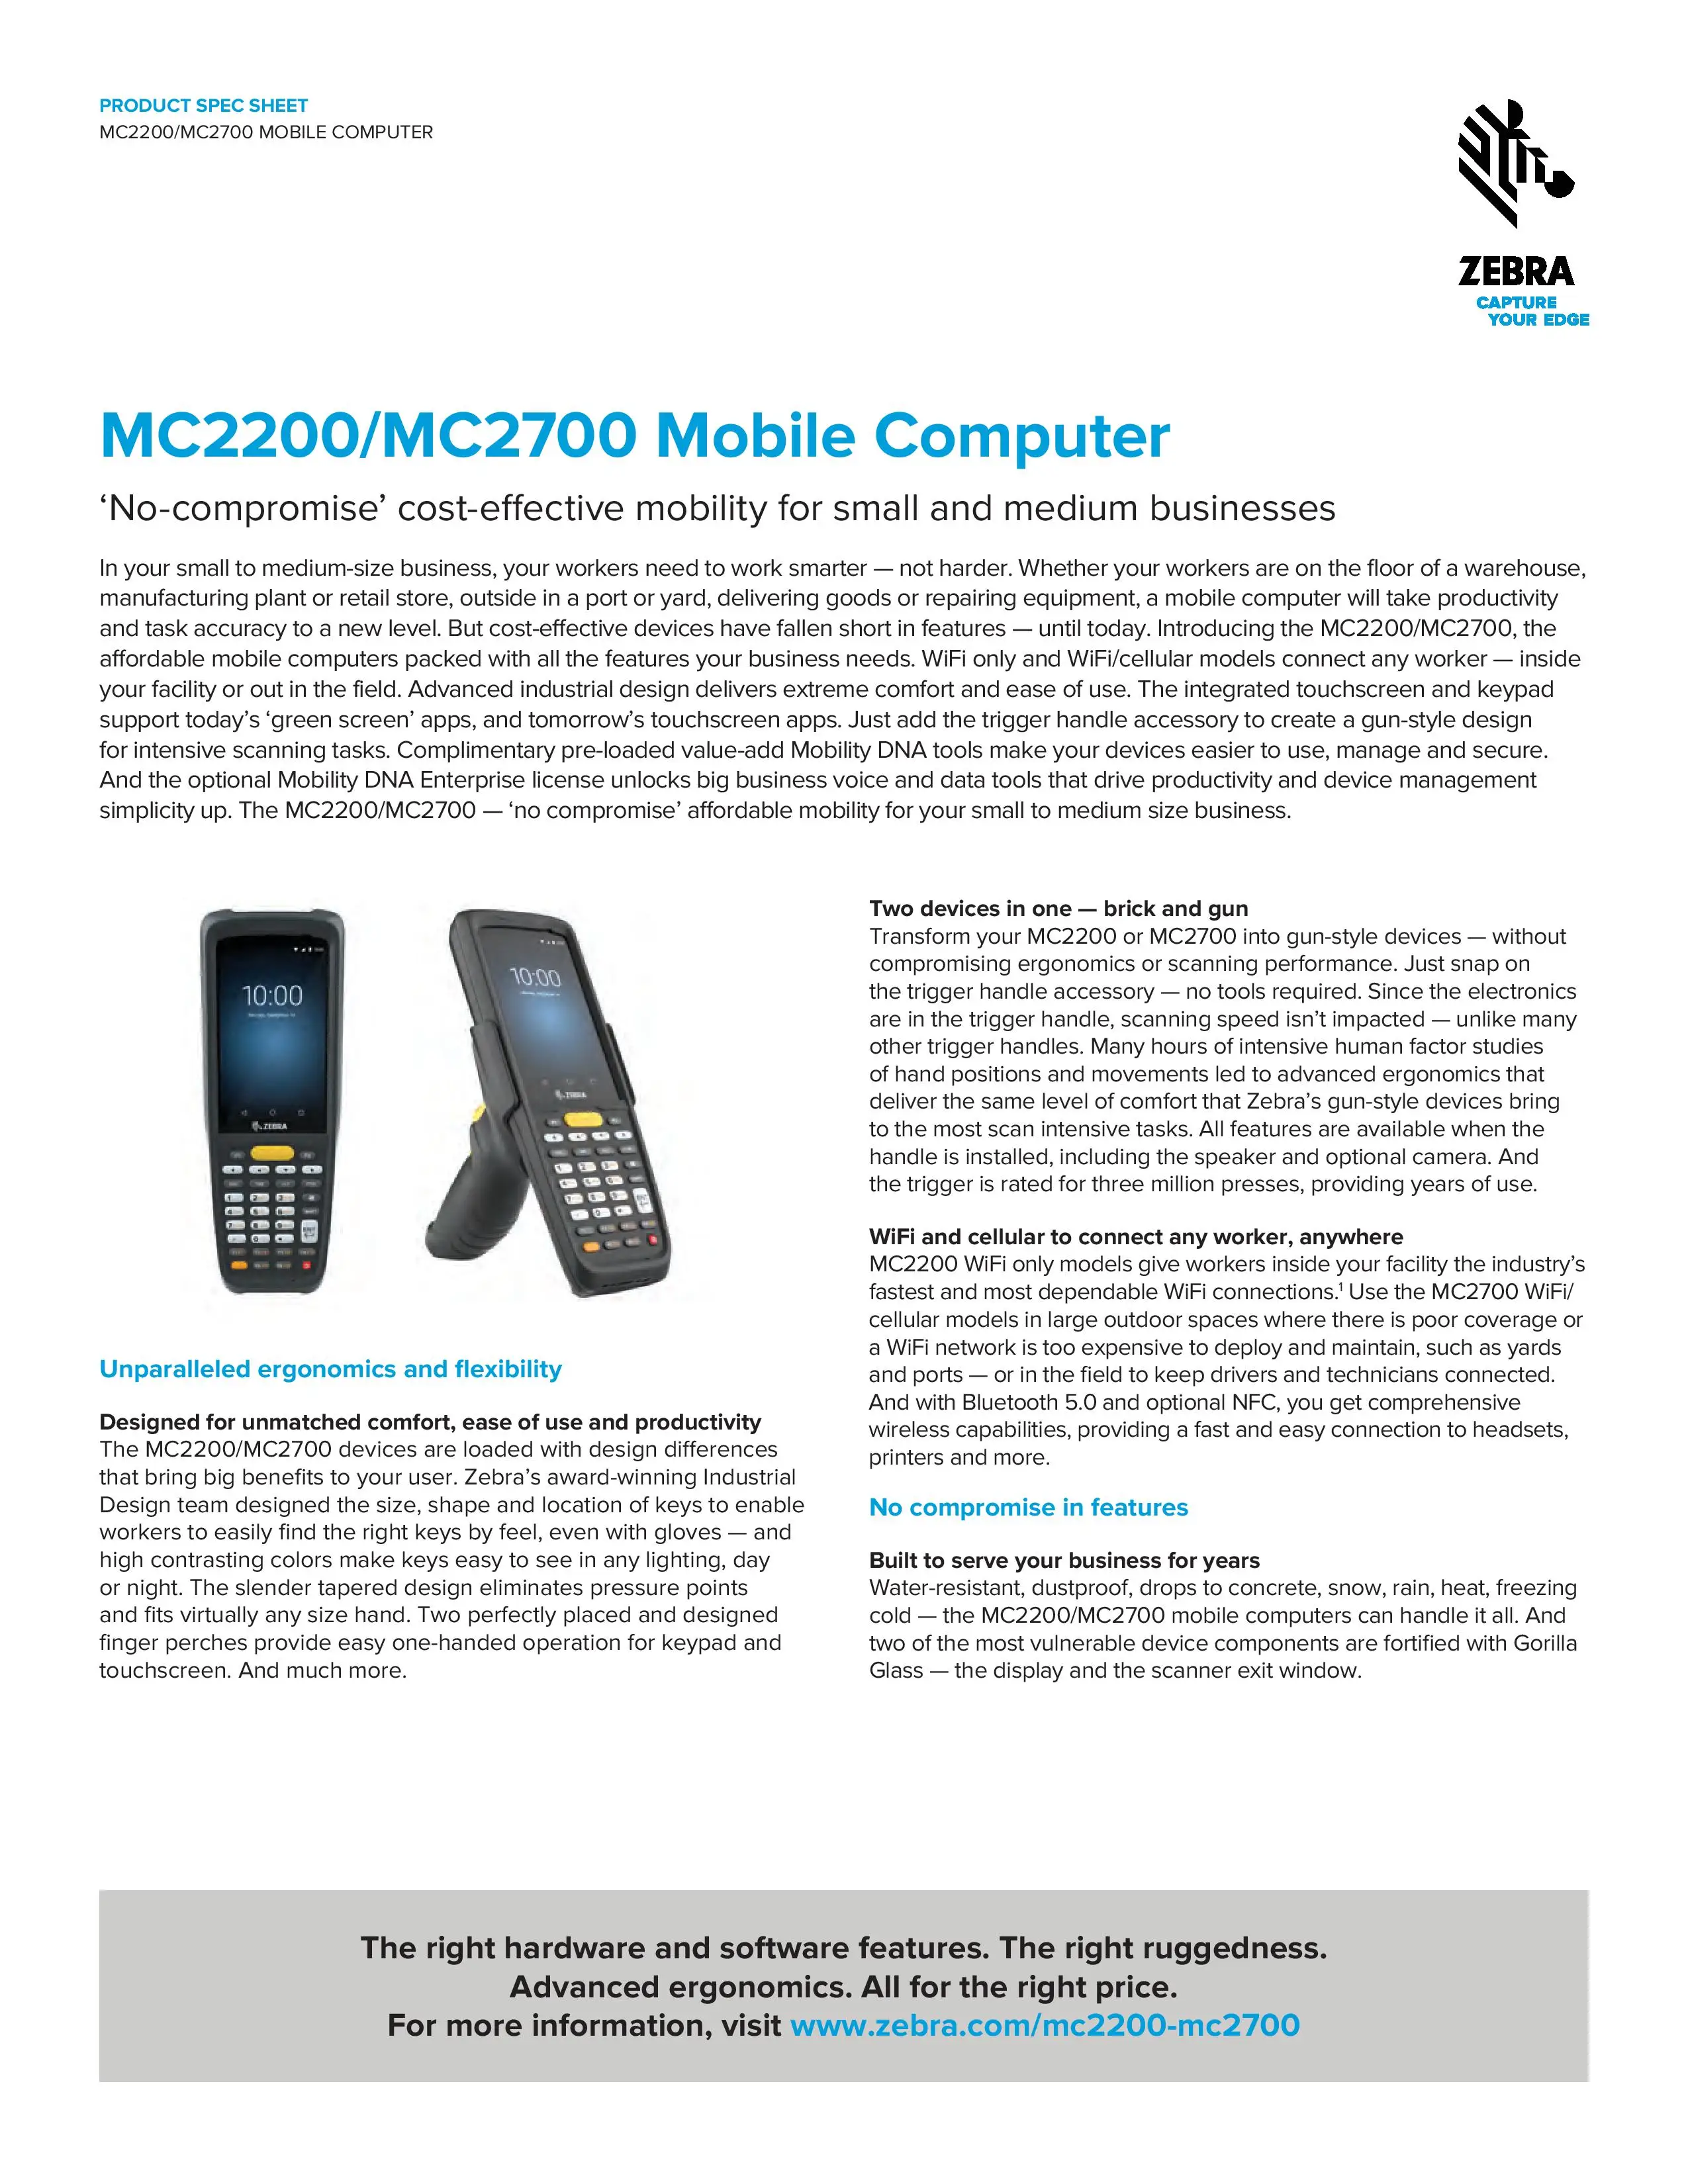 Zebra Mc2200 Mobile Computers For Small And Medium Sized Businesses Buy Rugged Barcode 7242